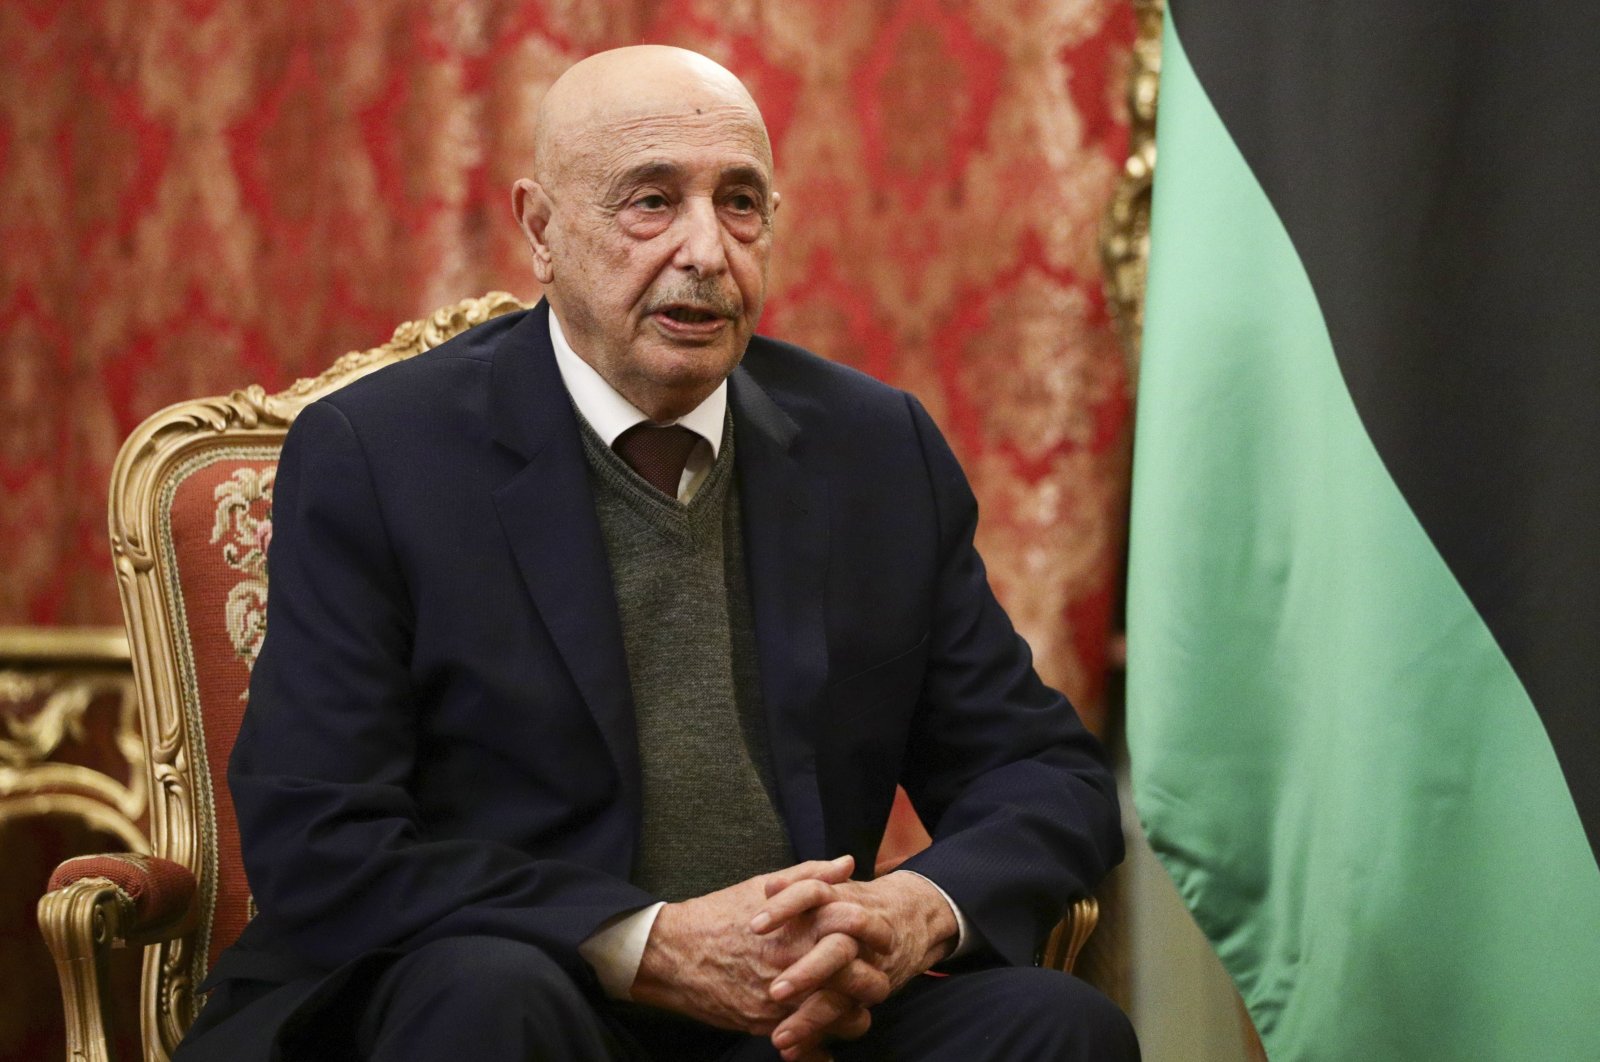 Libya&#039;s Parliament Speaker Aguila Saleh speaks to Russian Foreign Minister Sergey Lavro during their talks in Moscow, Russia, Nov. 24, 2020. (Russian Foreign Ministry Press Service via AP)